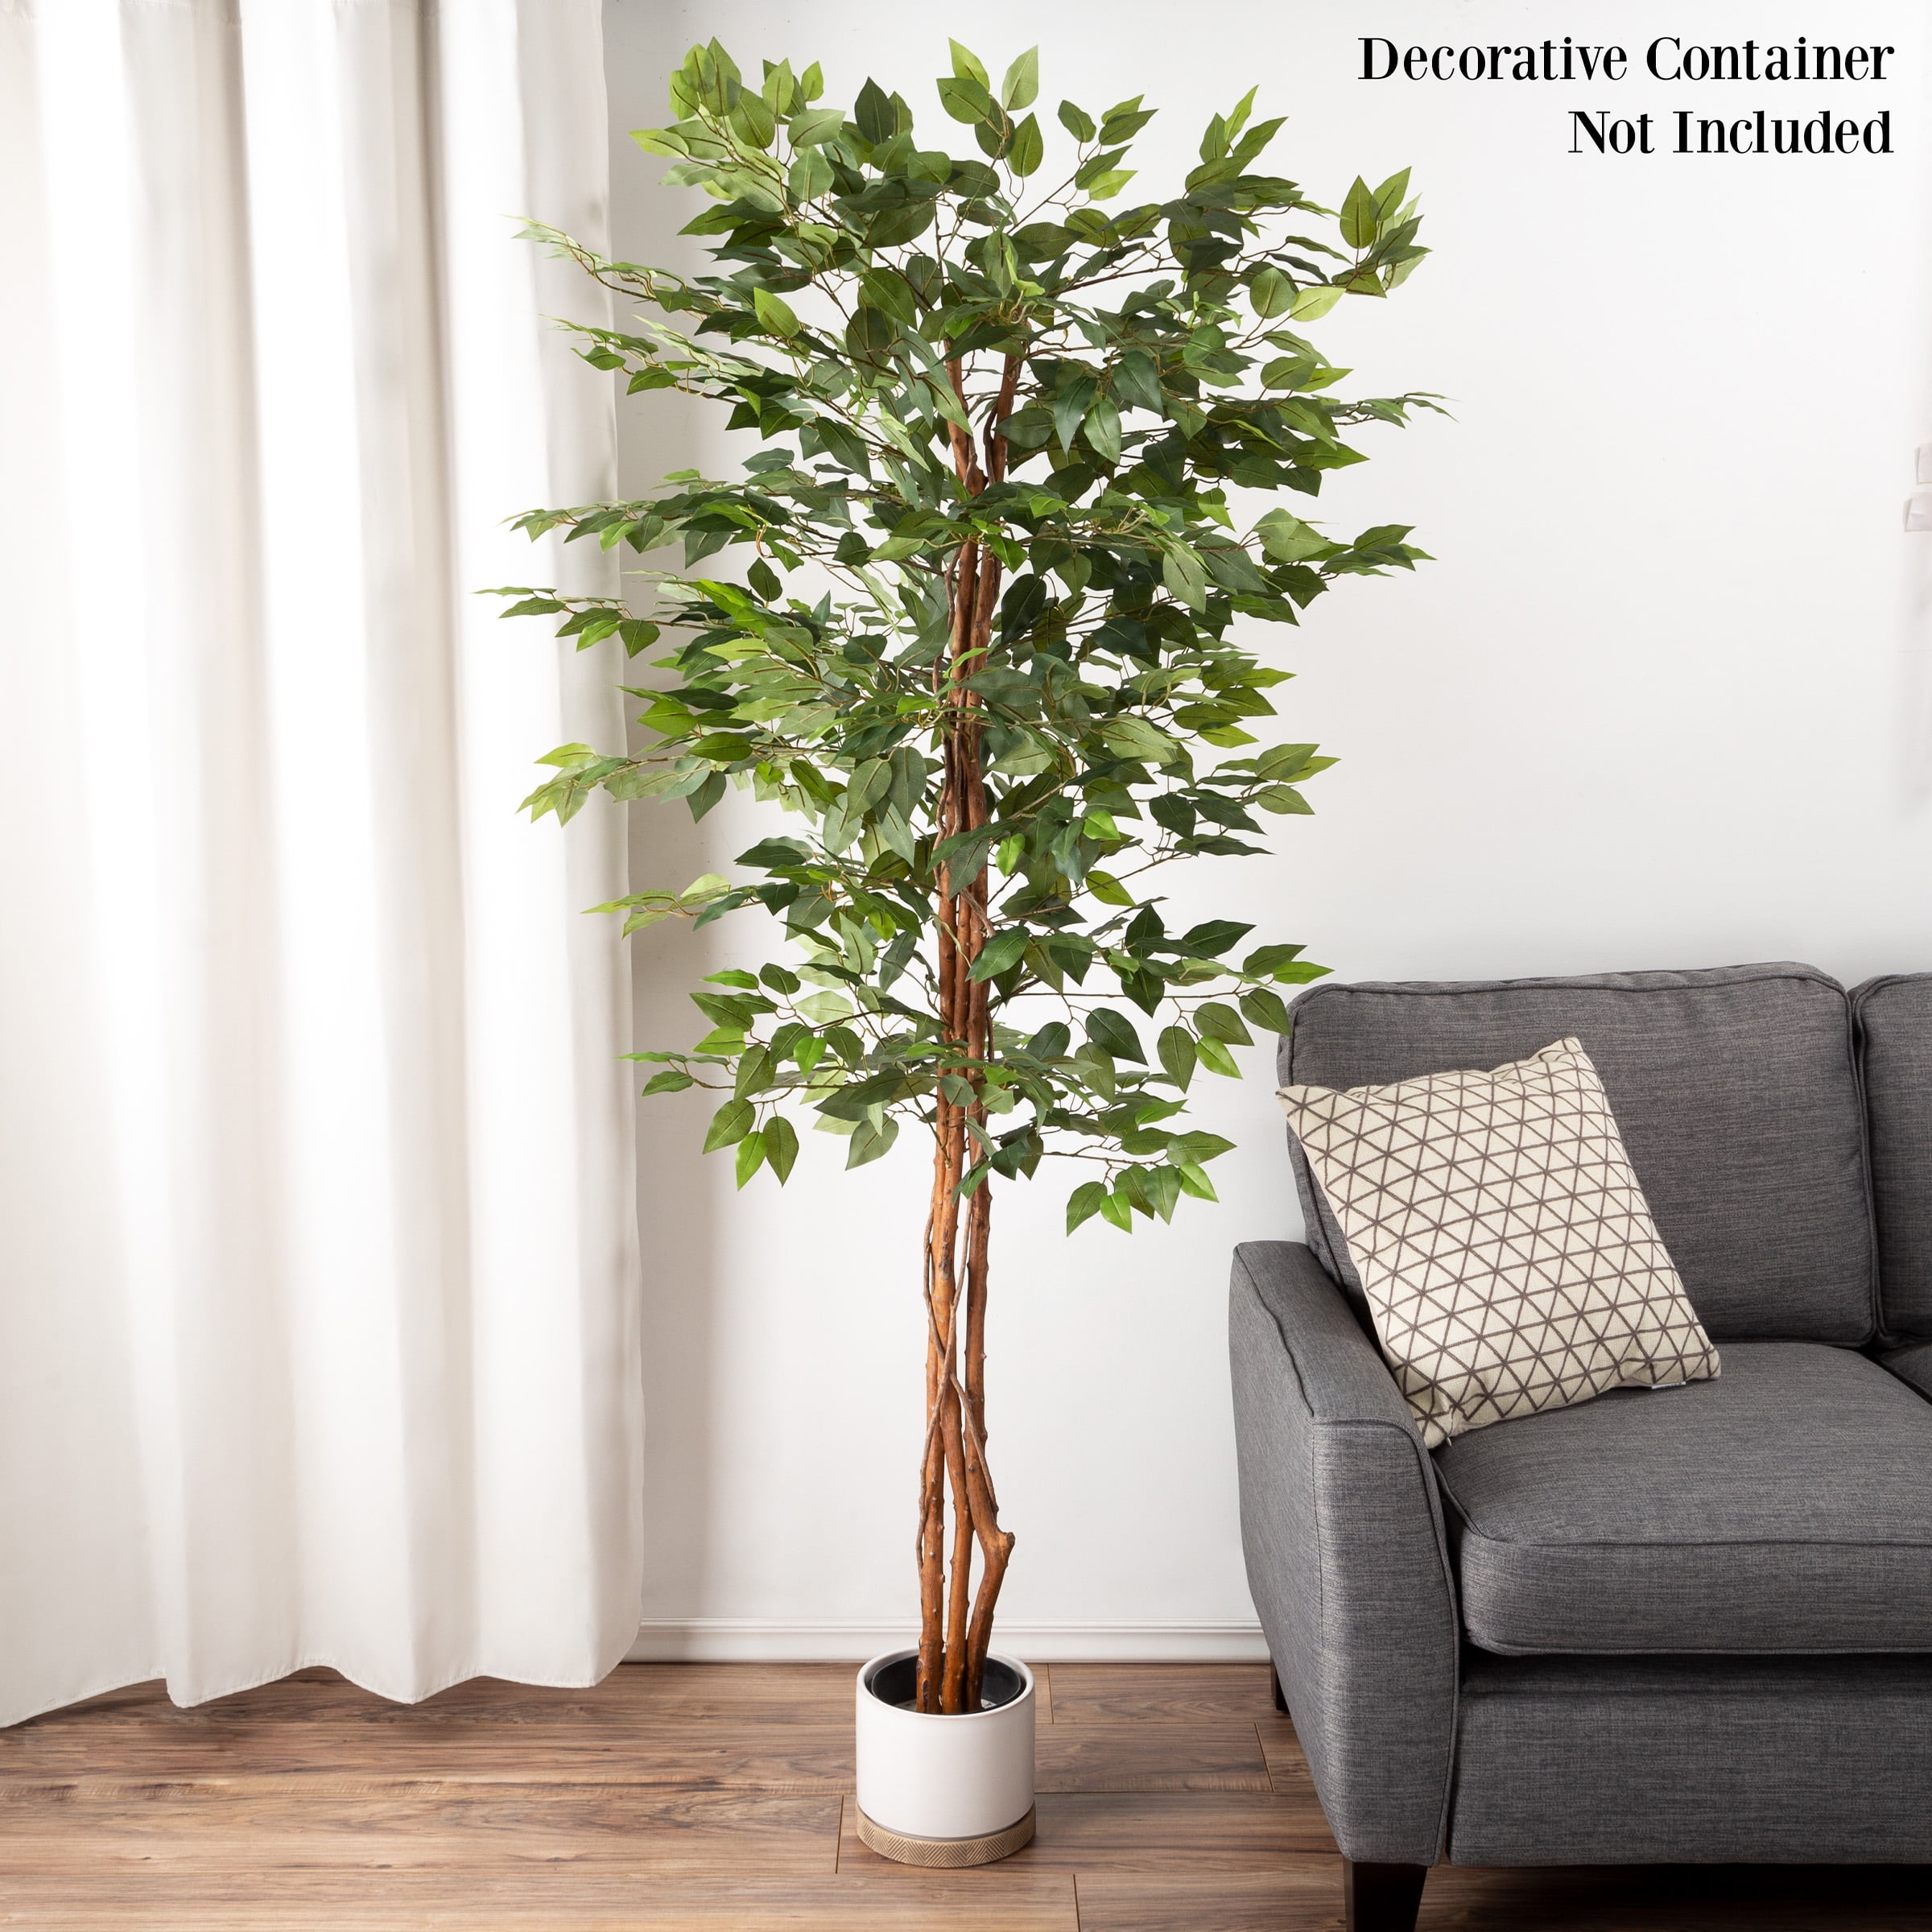 How To Plant A Potted Tree - www.inf-inet.com